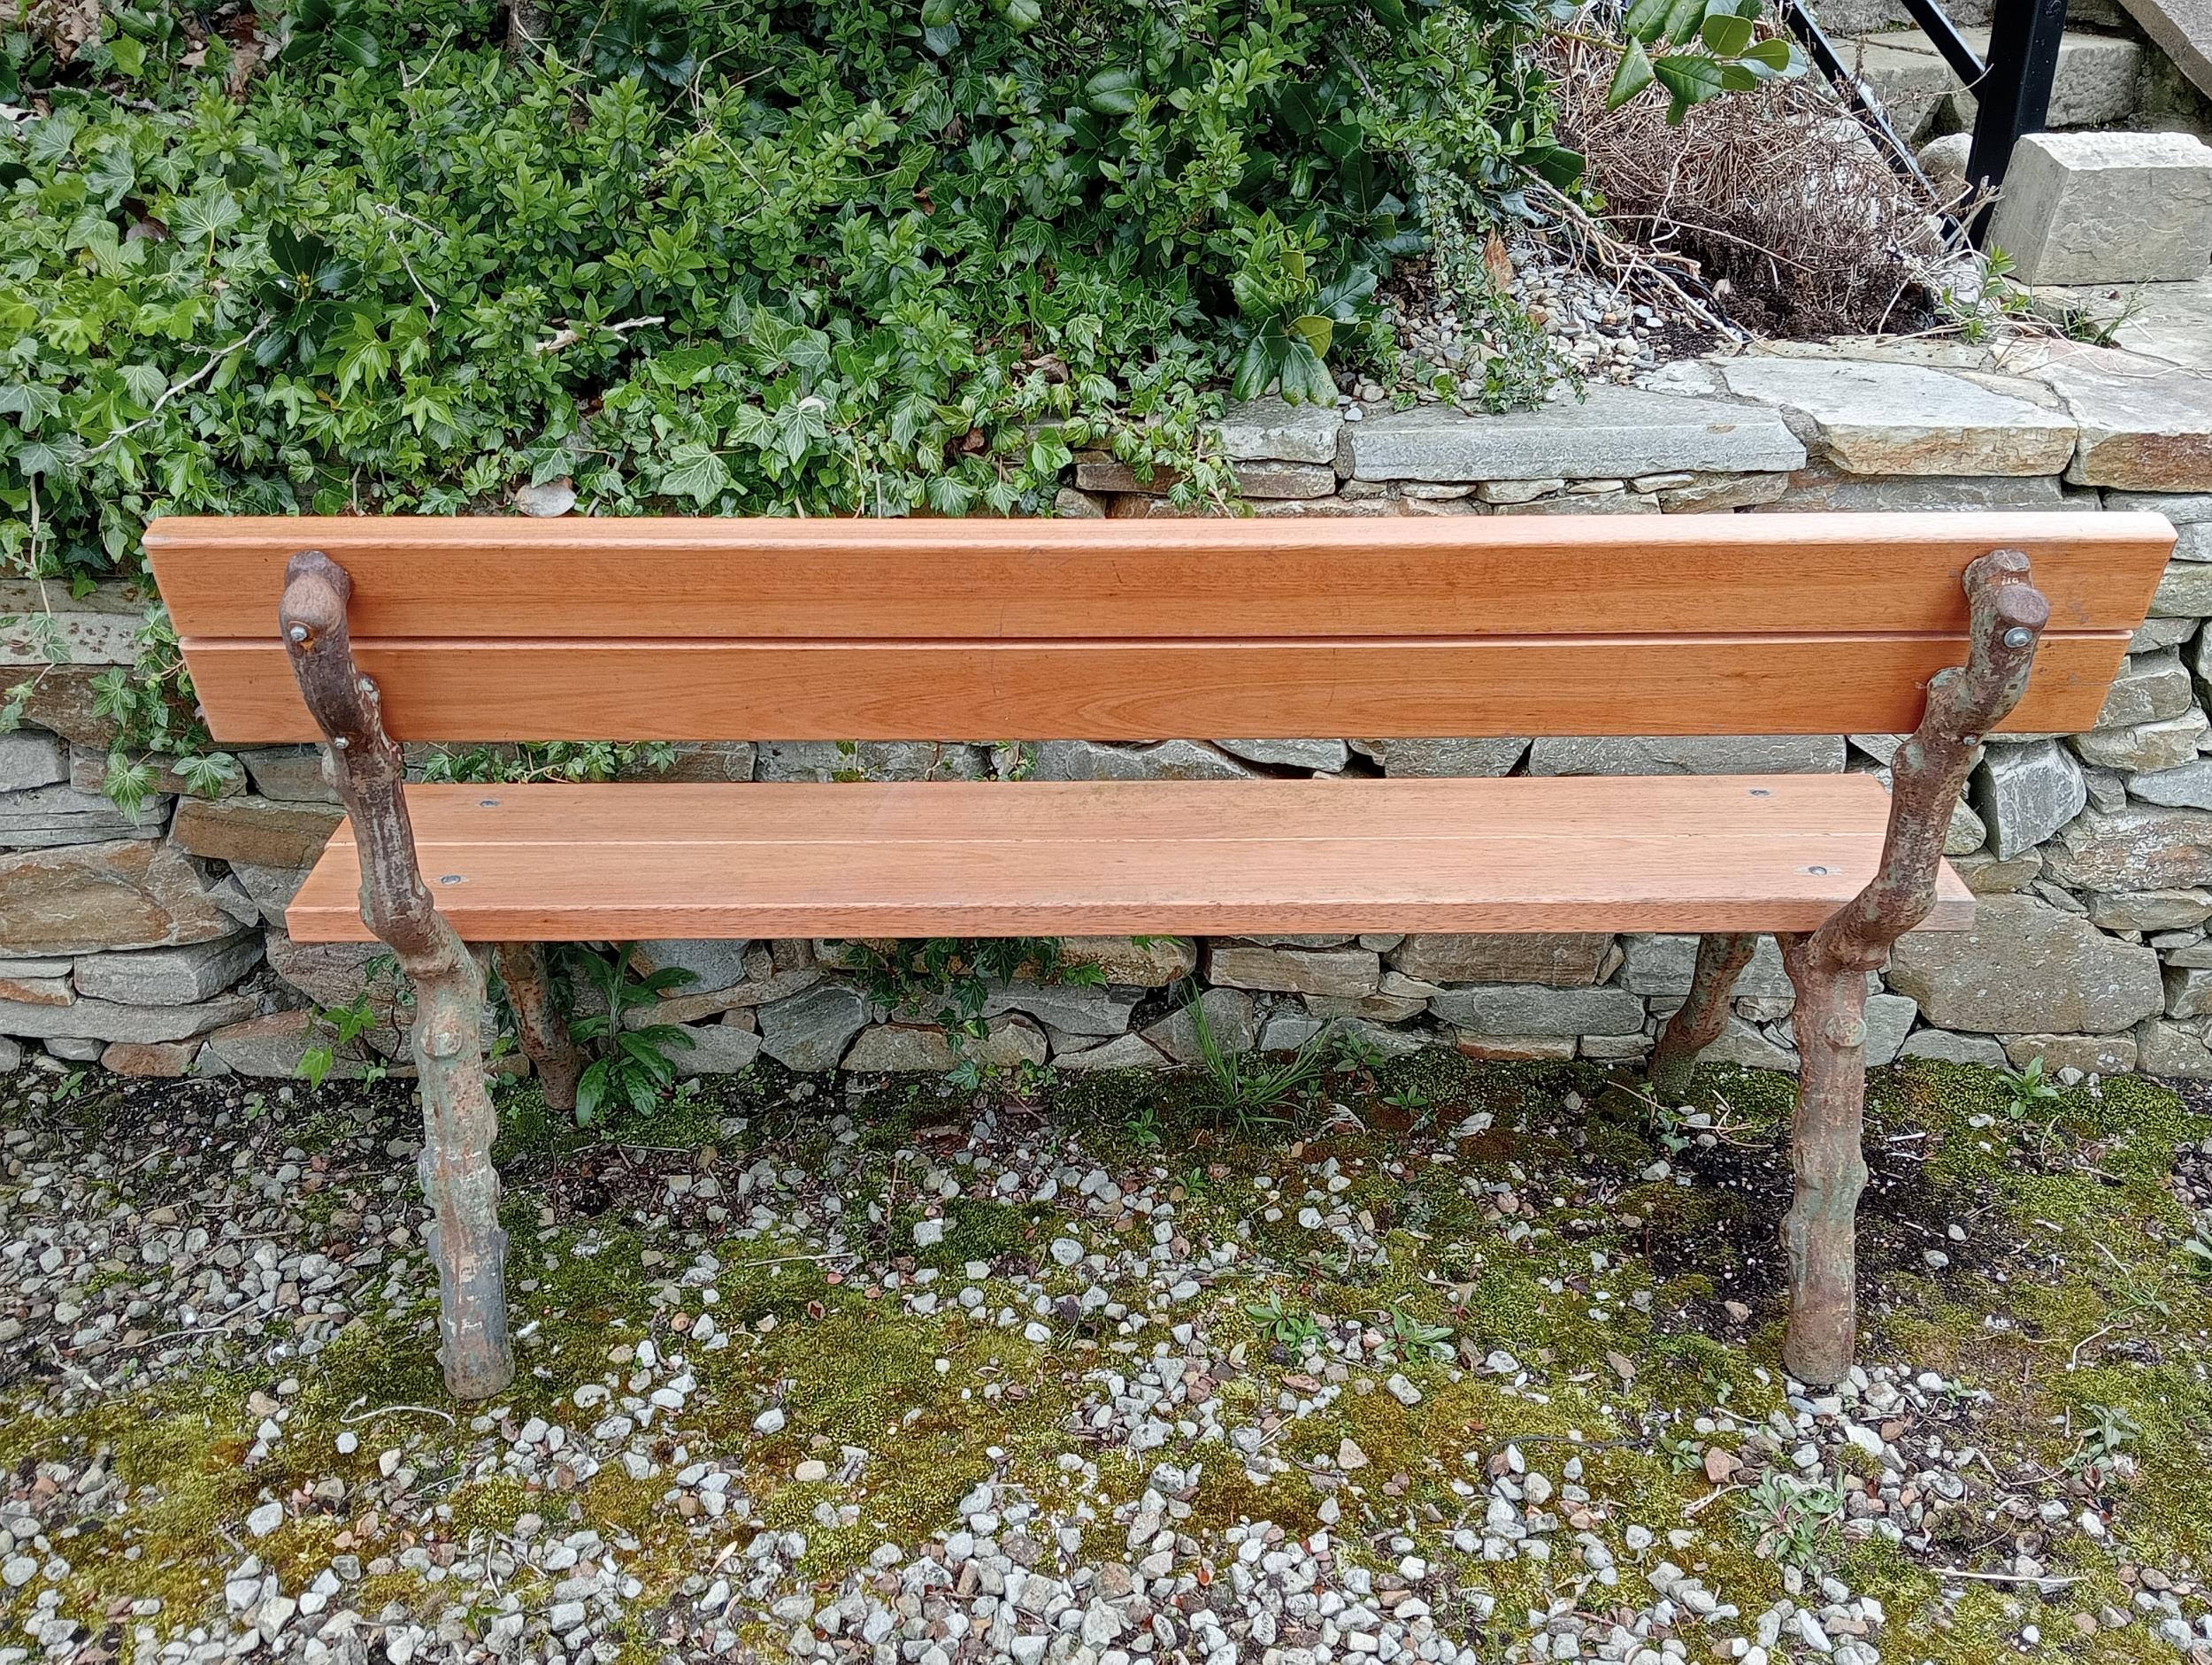 Cast iron rustic bramble bench with wooden slats {H 85cm x W 155cm x D 50cm}. (NOT AVAILABLE TO VIEW - Image 4 of 4